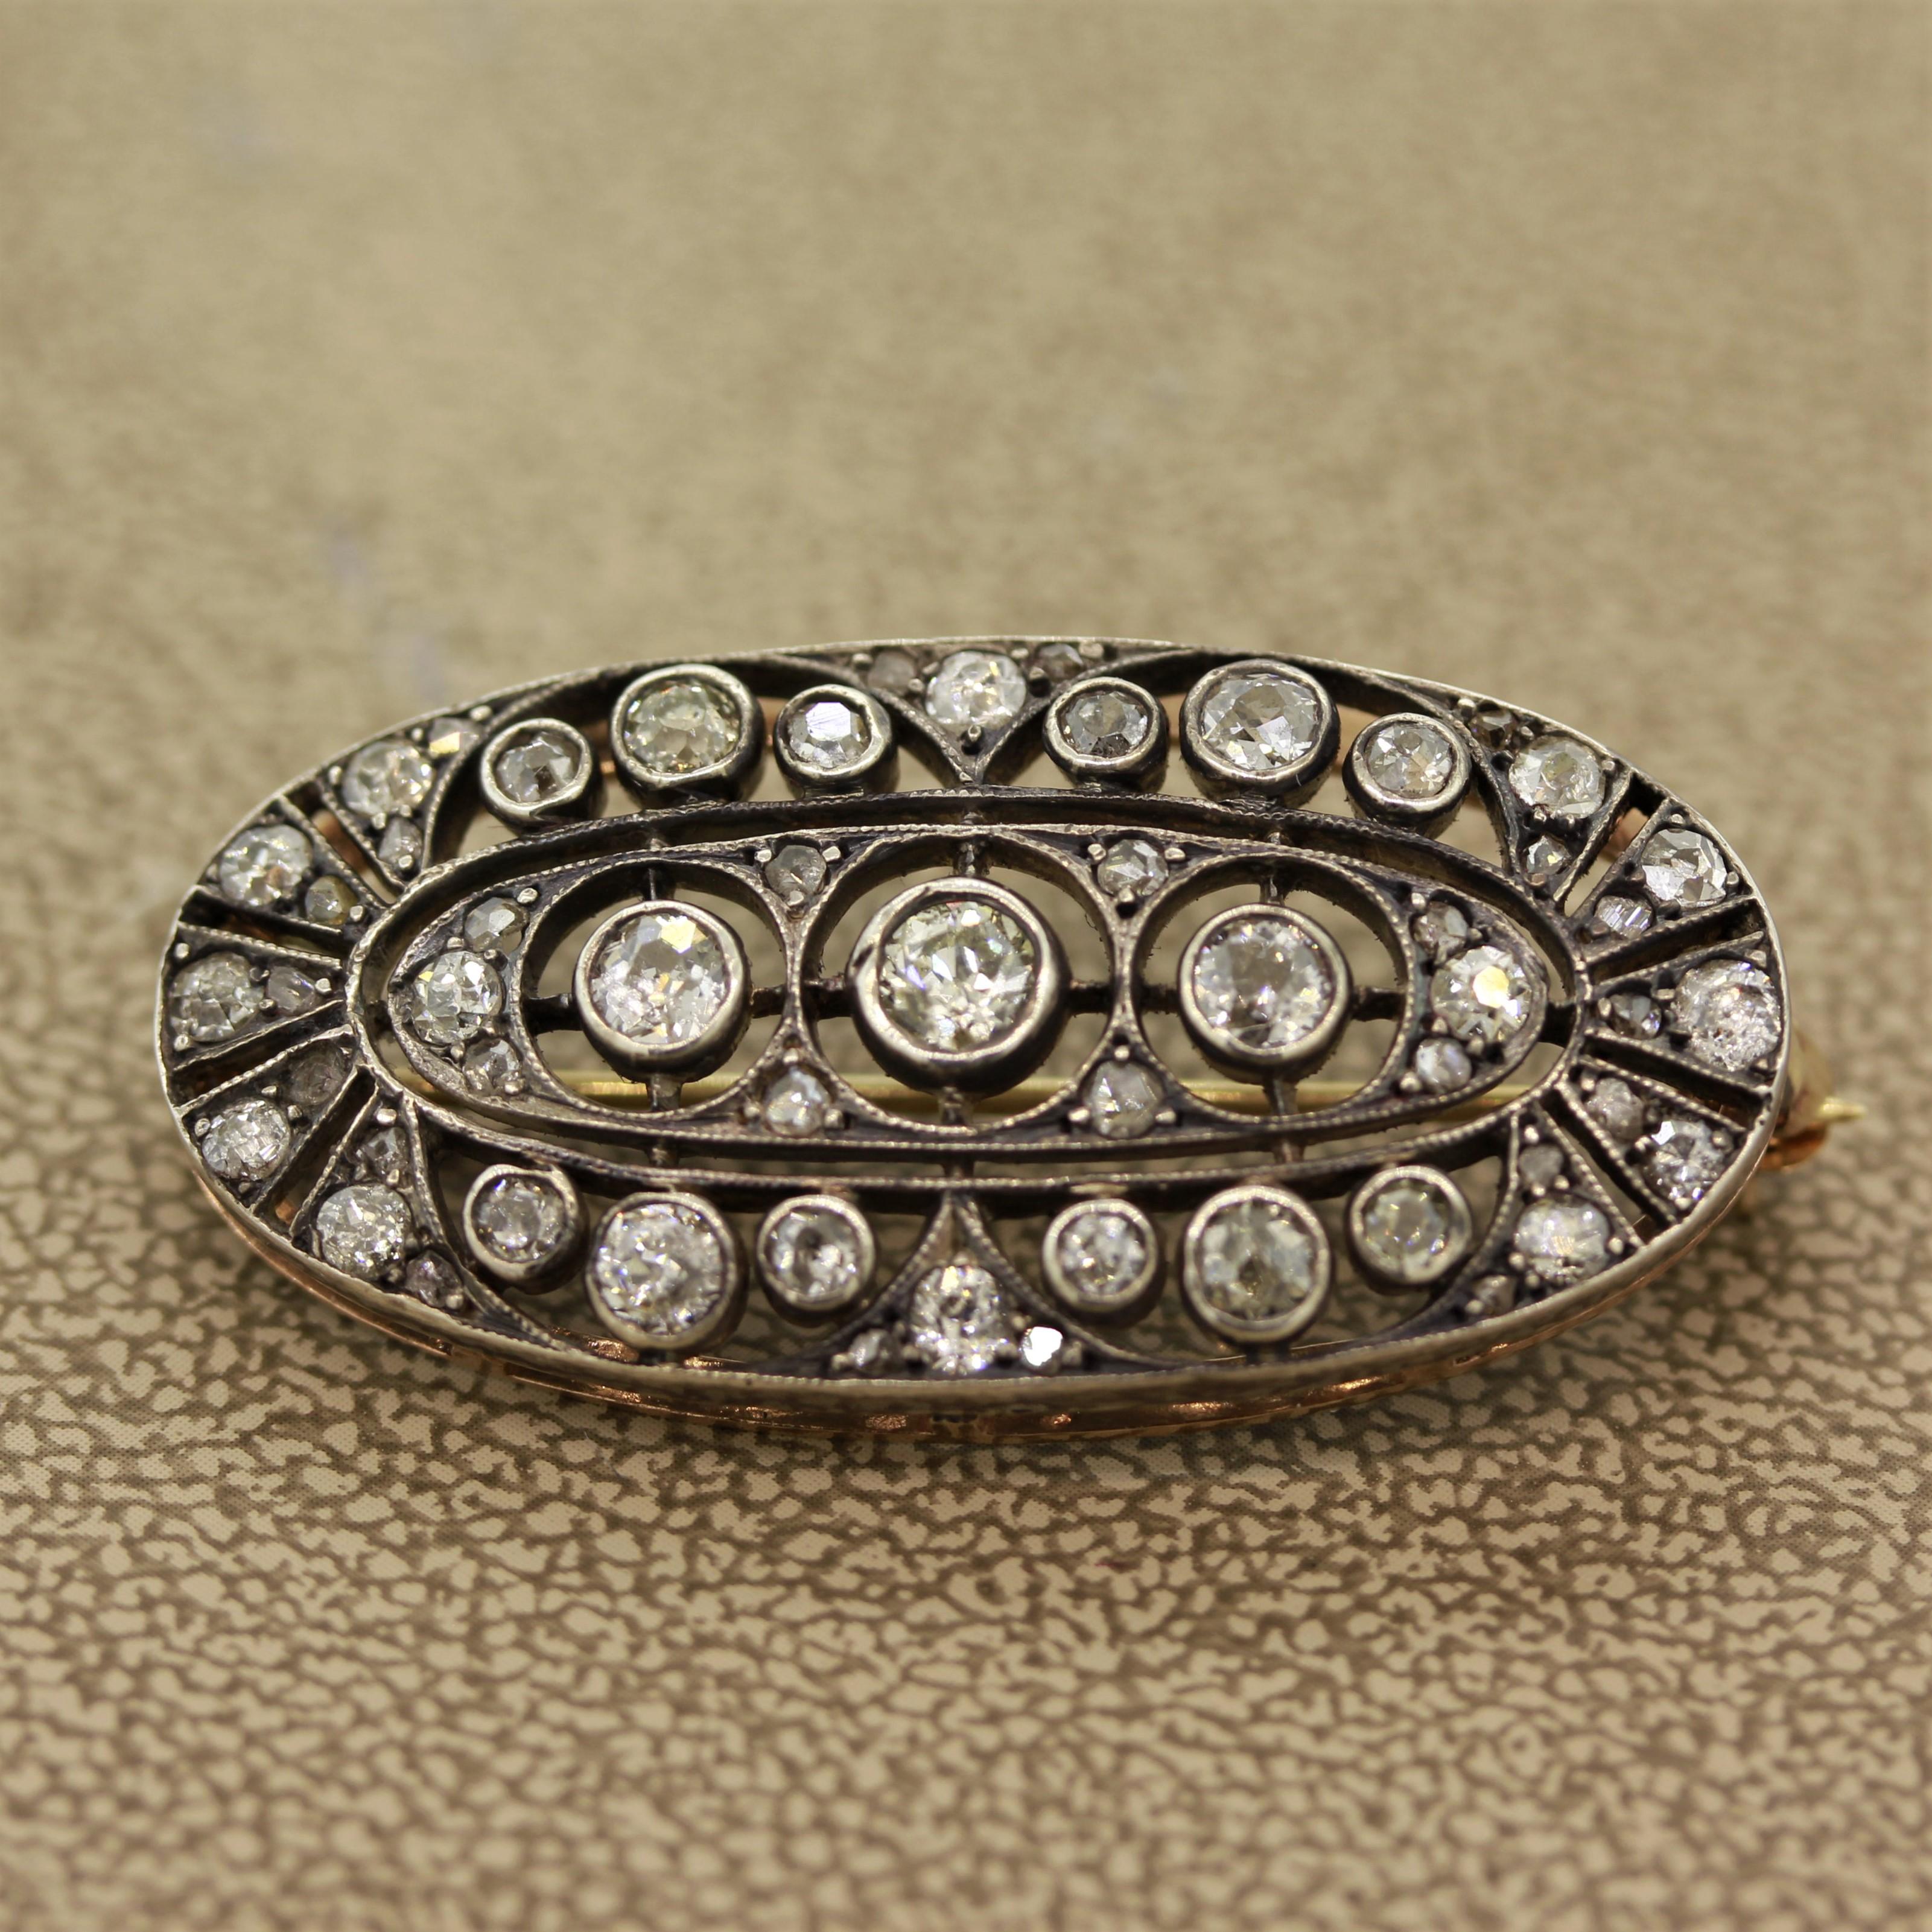 An antique from the Victorian era in original condition, circa 1895. It features approximately 2 carats of round European cut diamonds along with smaller rose cut diamonds. They are set in 14k gold and the top of the piece is “silver-topped” to give